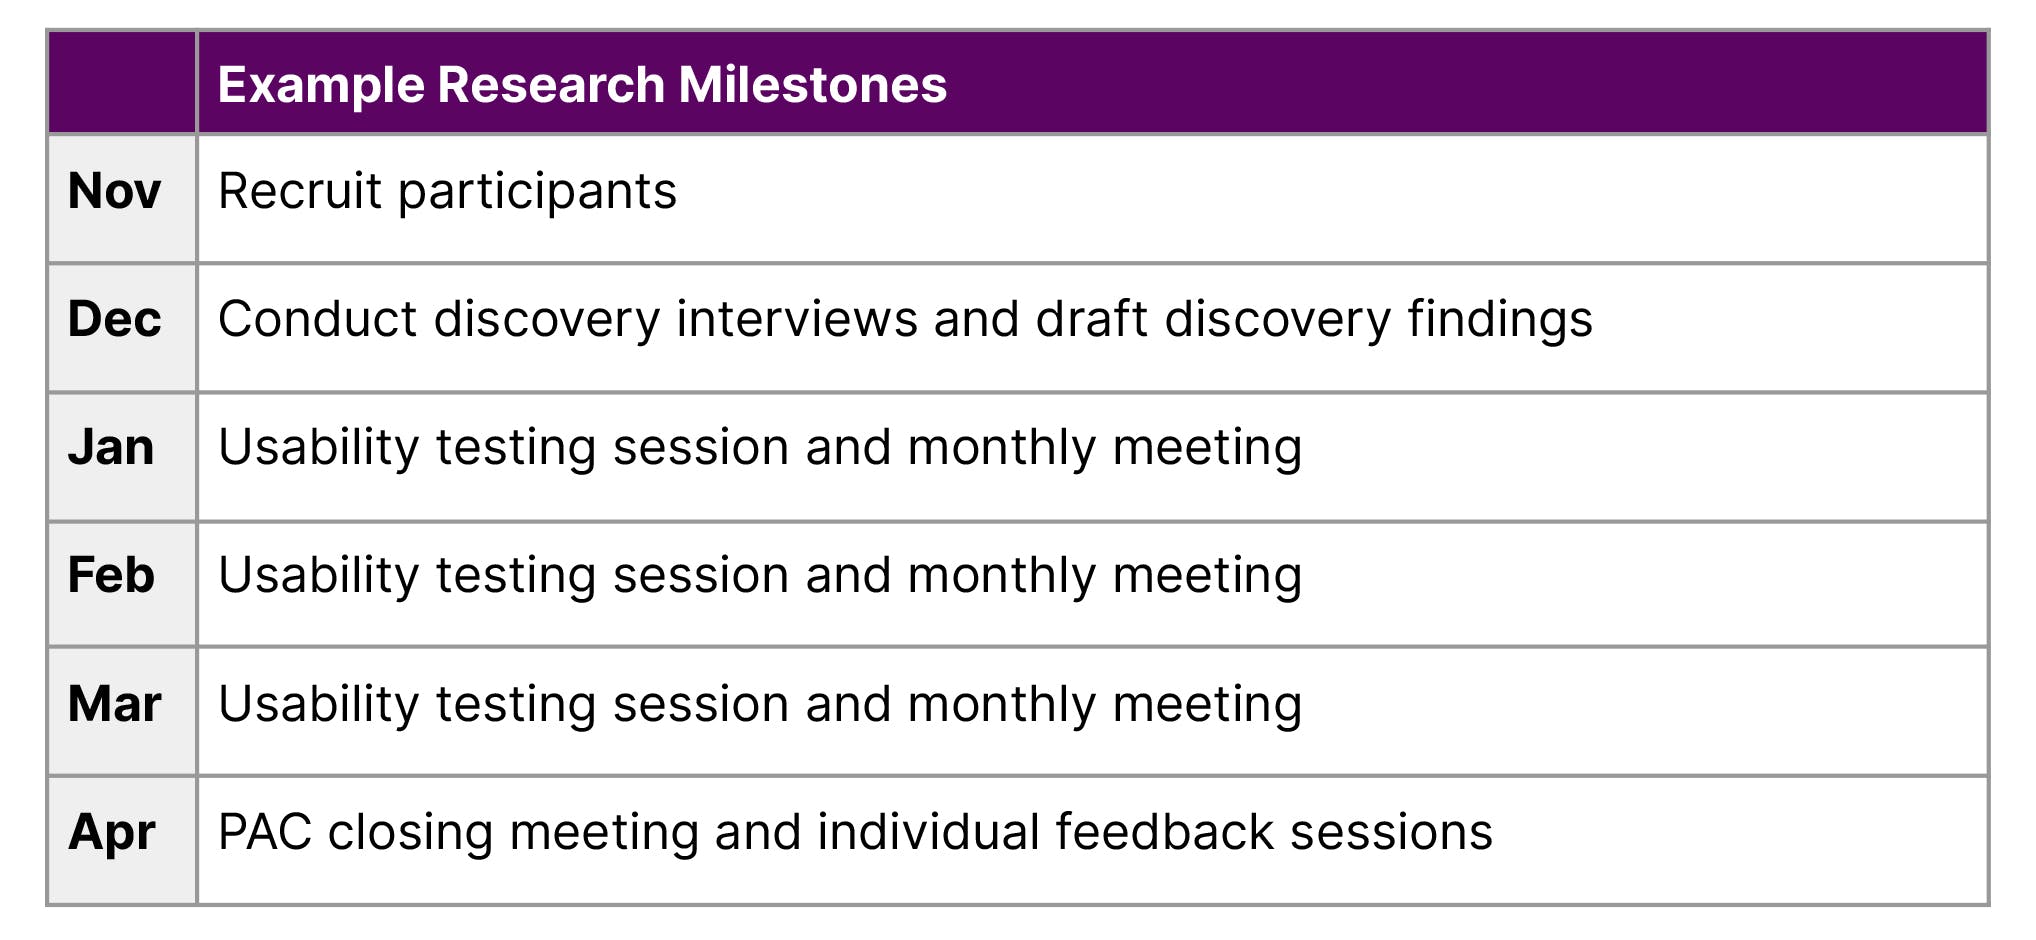 A chart showing example research milestones. 